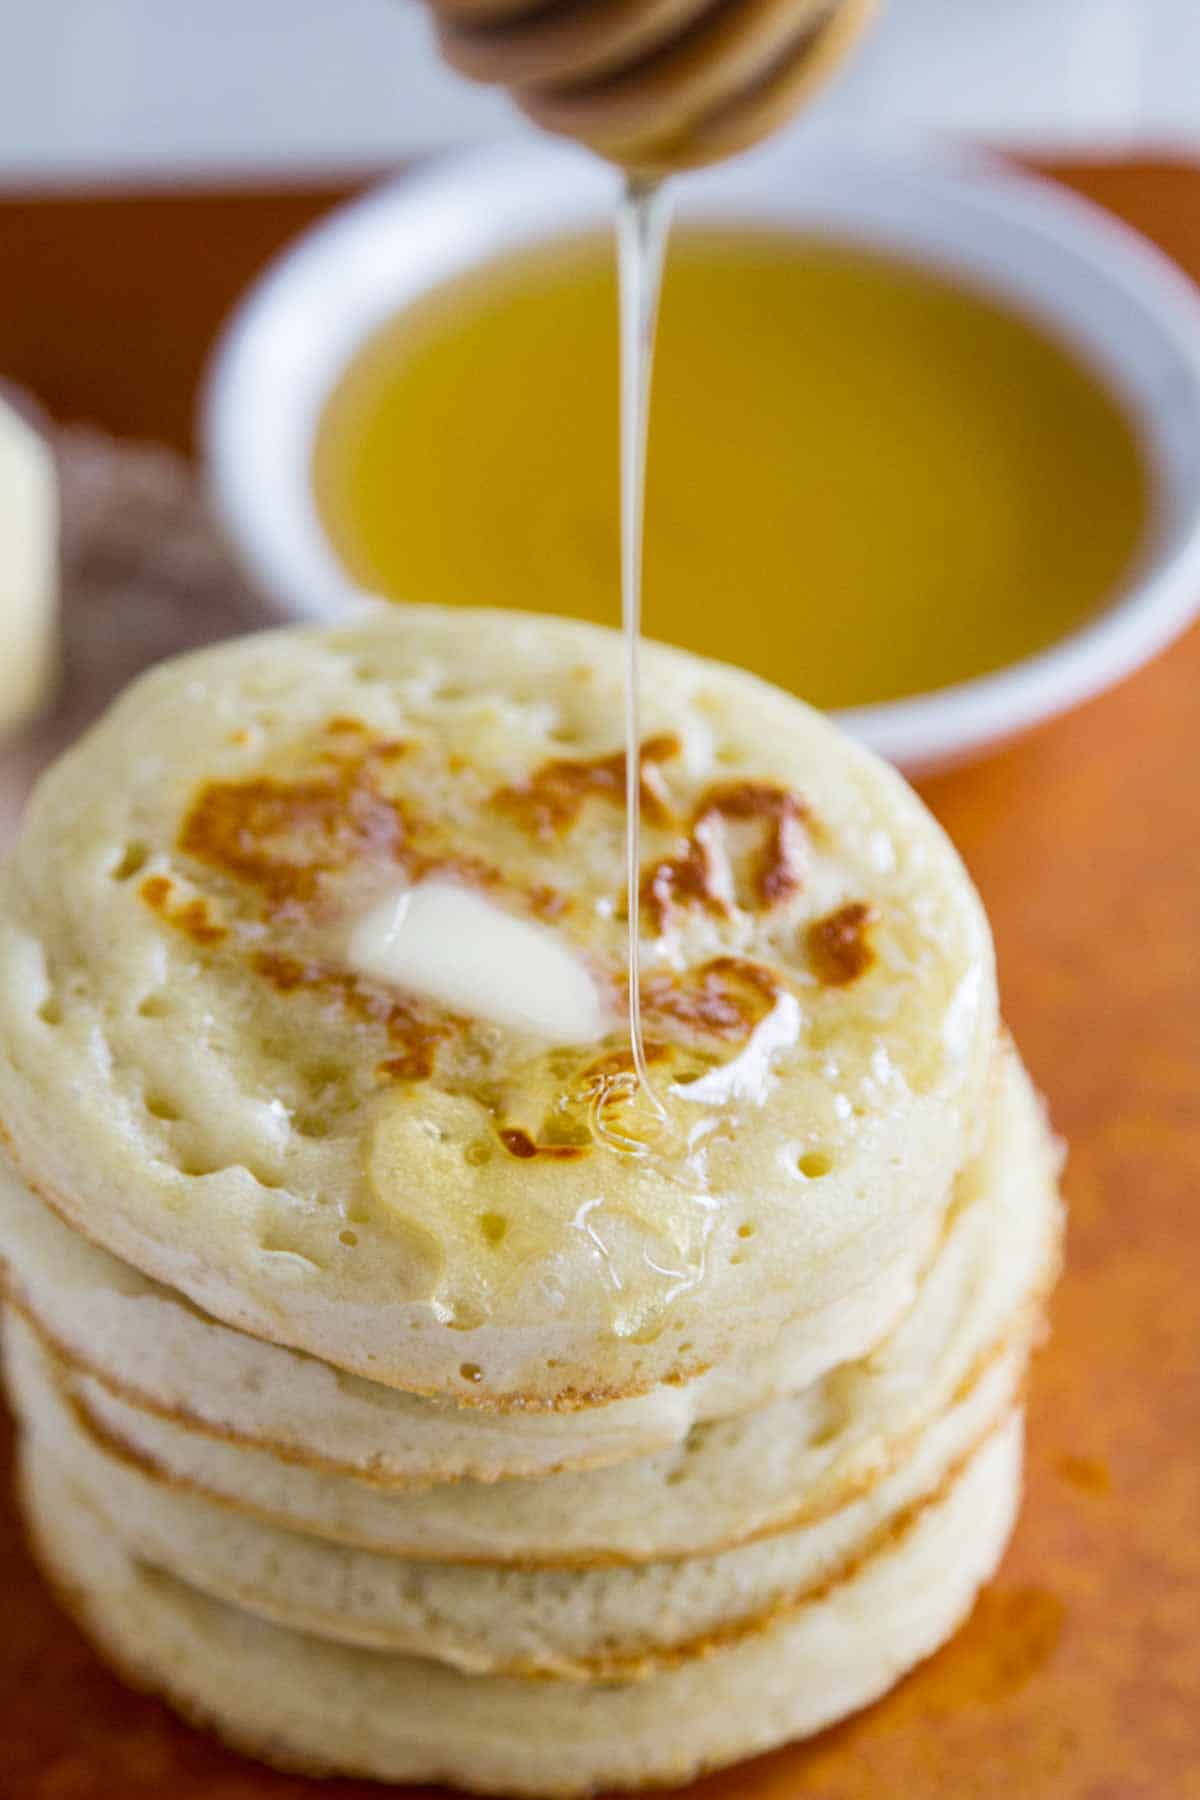 How To Make Crumpets - Crumpet Recipe - Taste and Tell